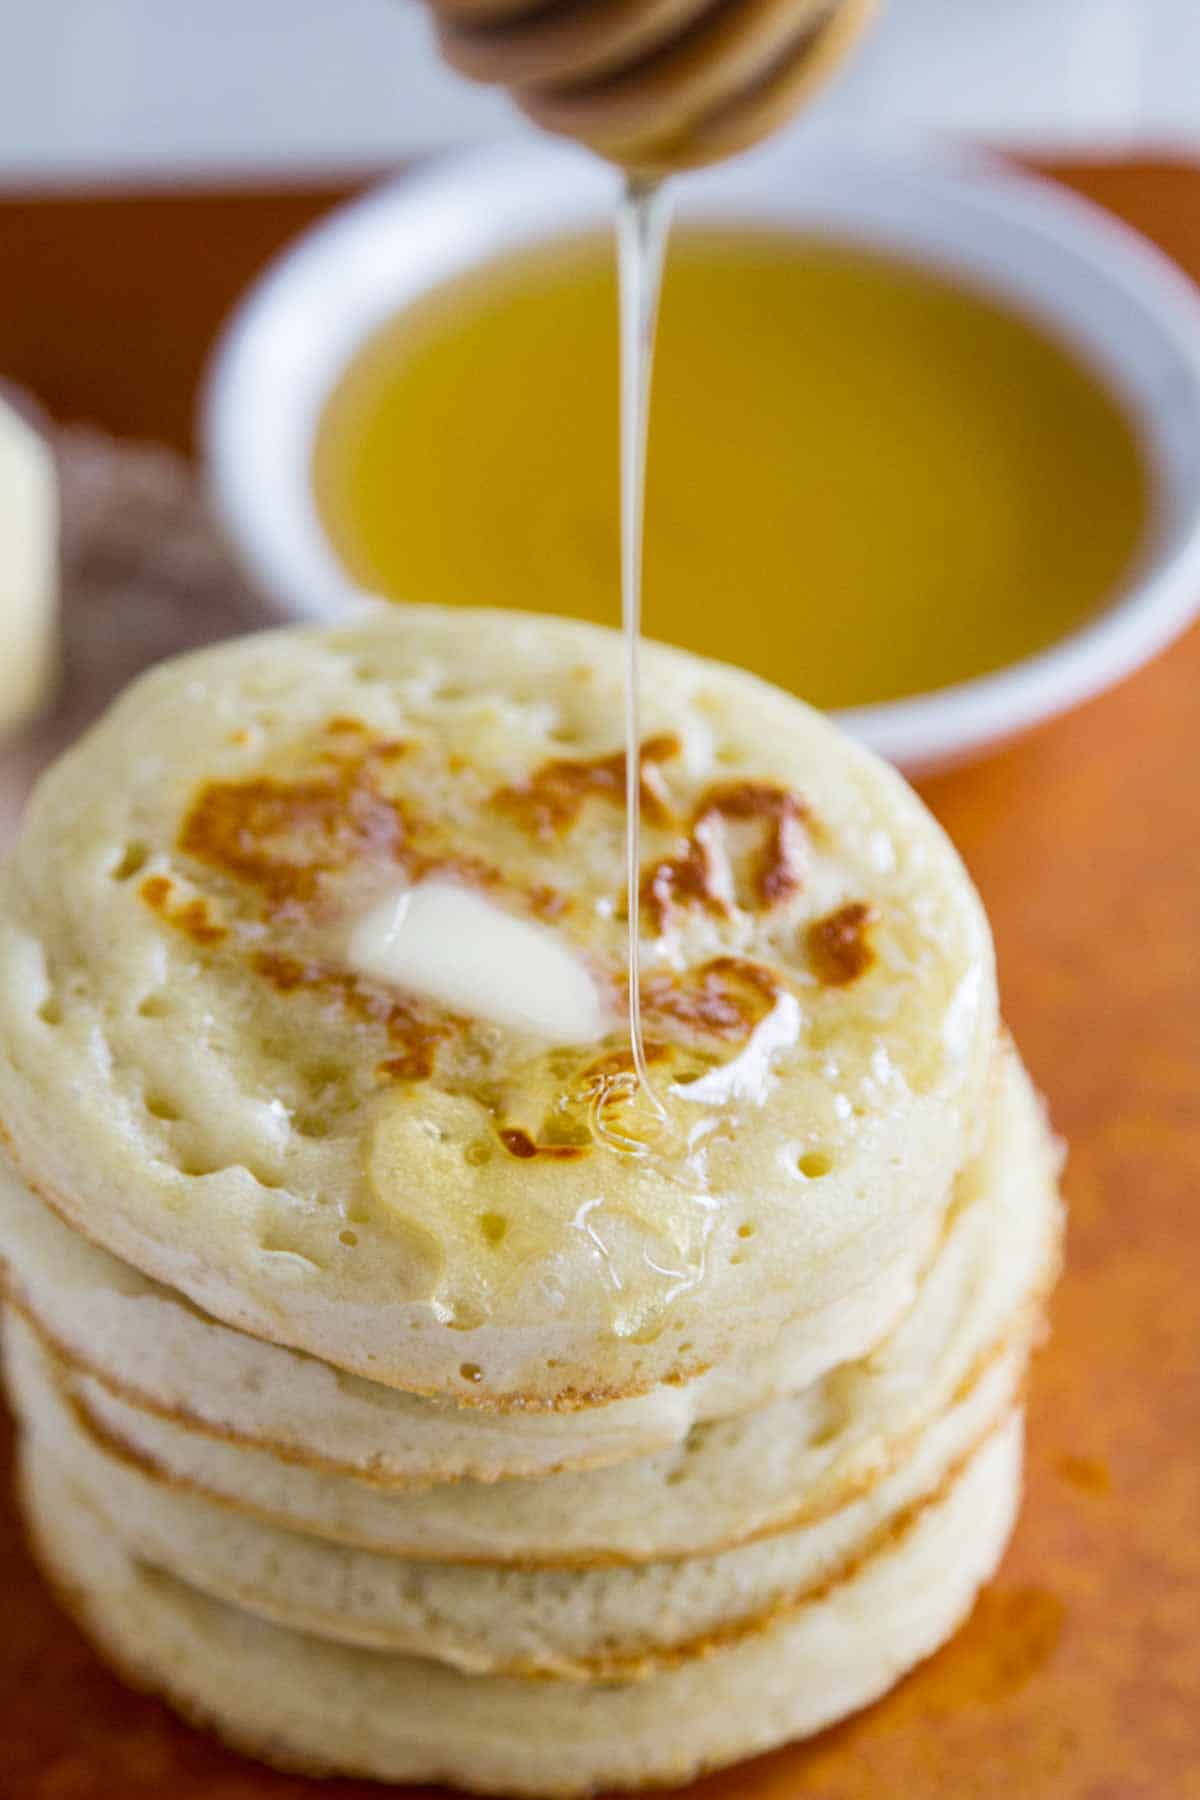 How To Make Crumpets - Crumpet Recipe - Taste and Tell